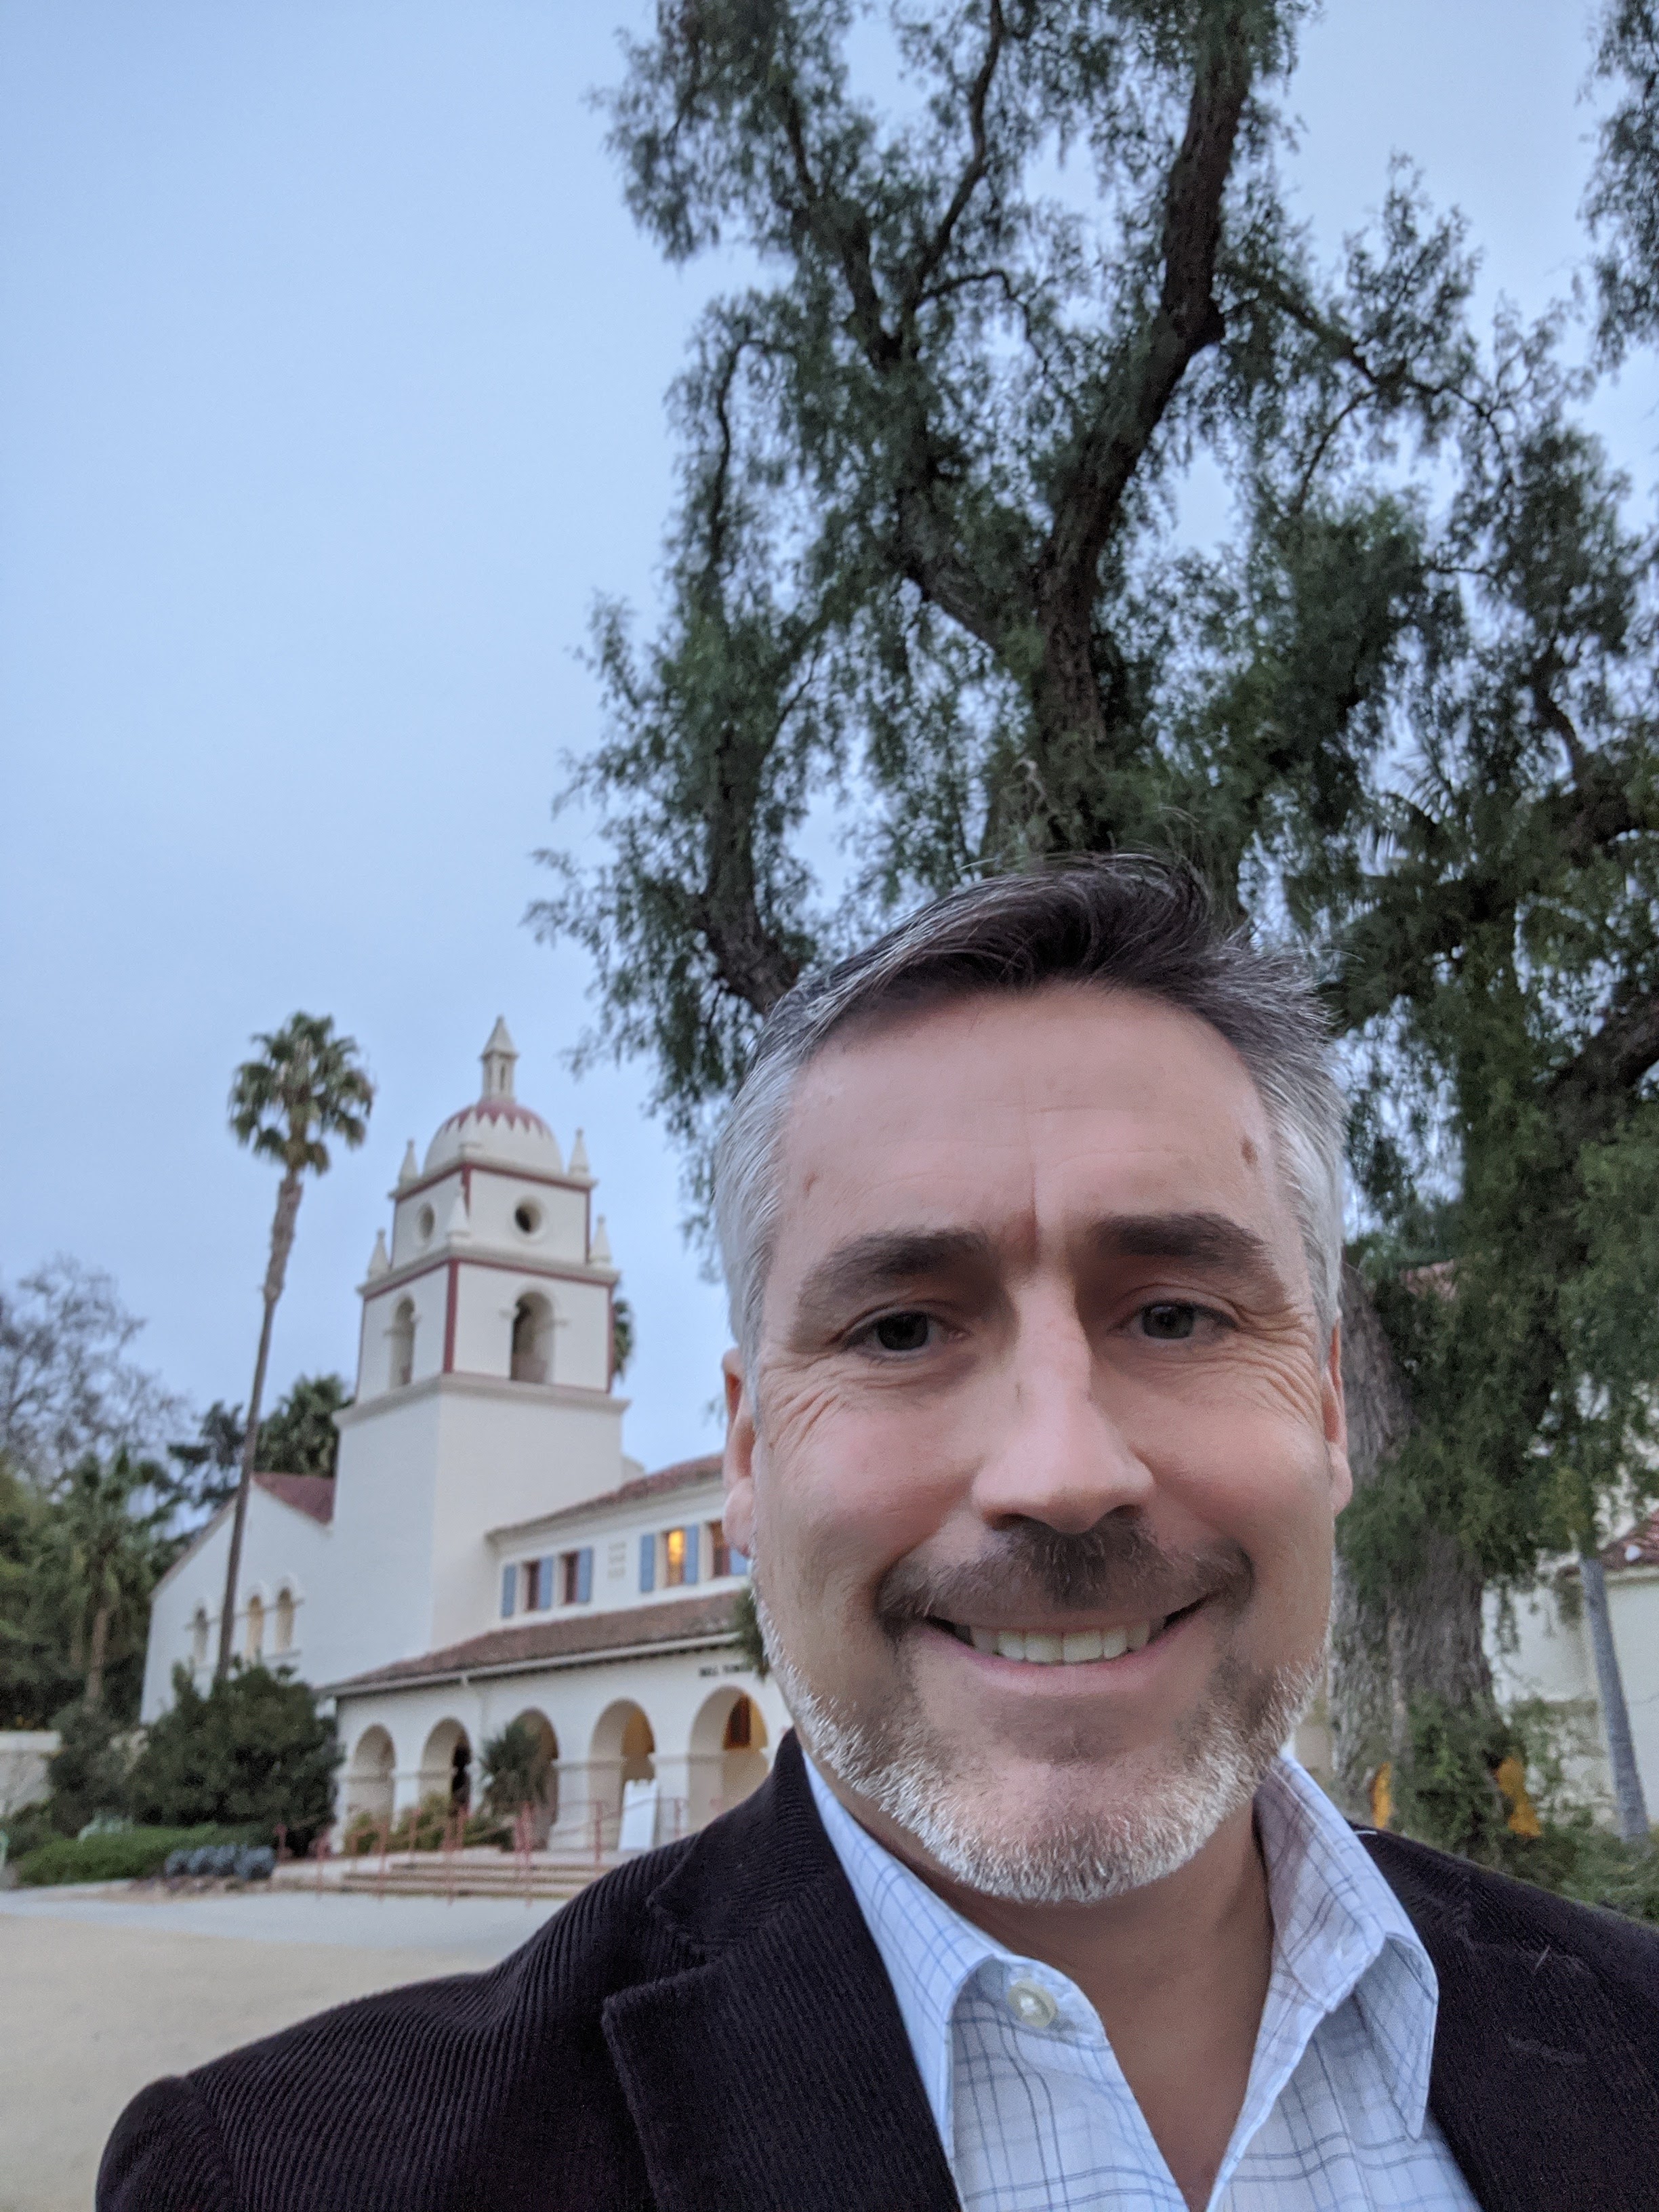 Mark Patterson '89 selfie in front of a building